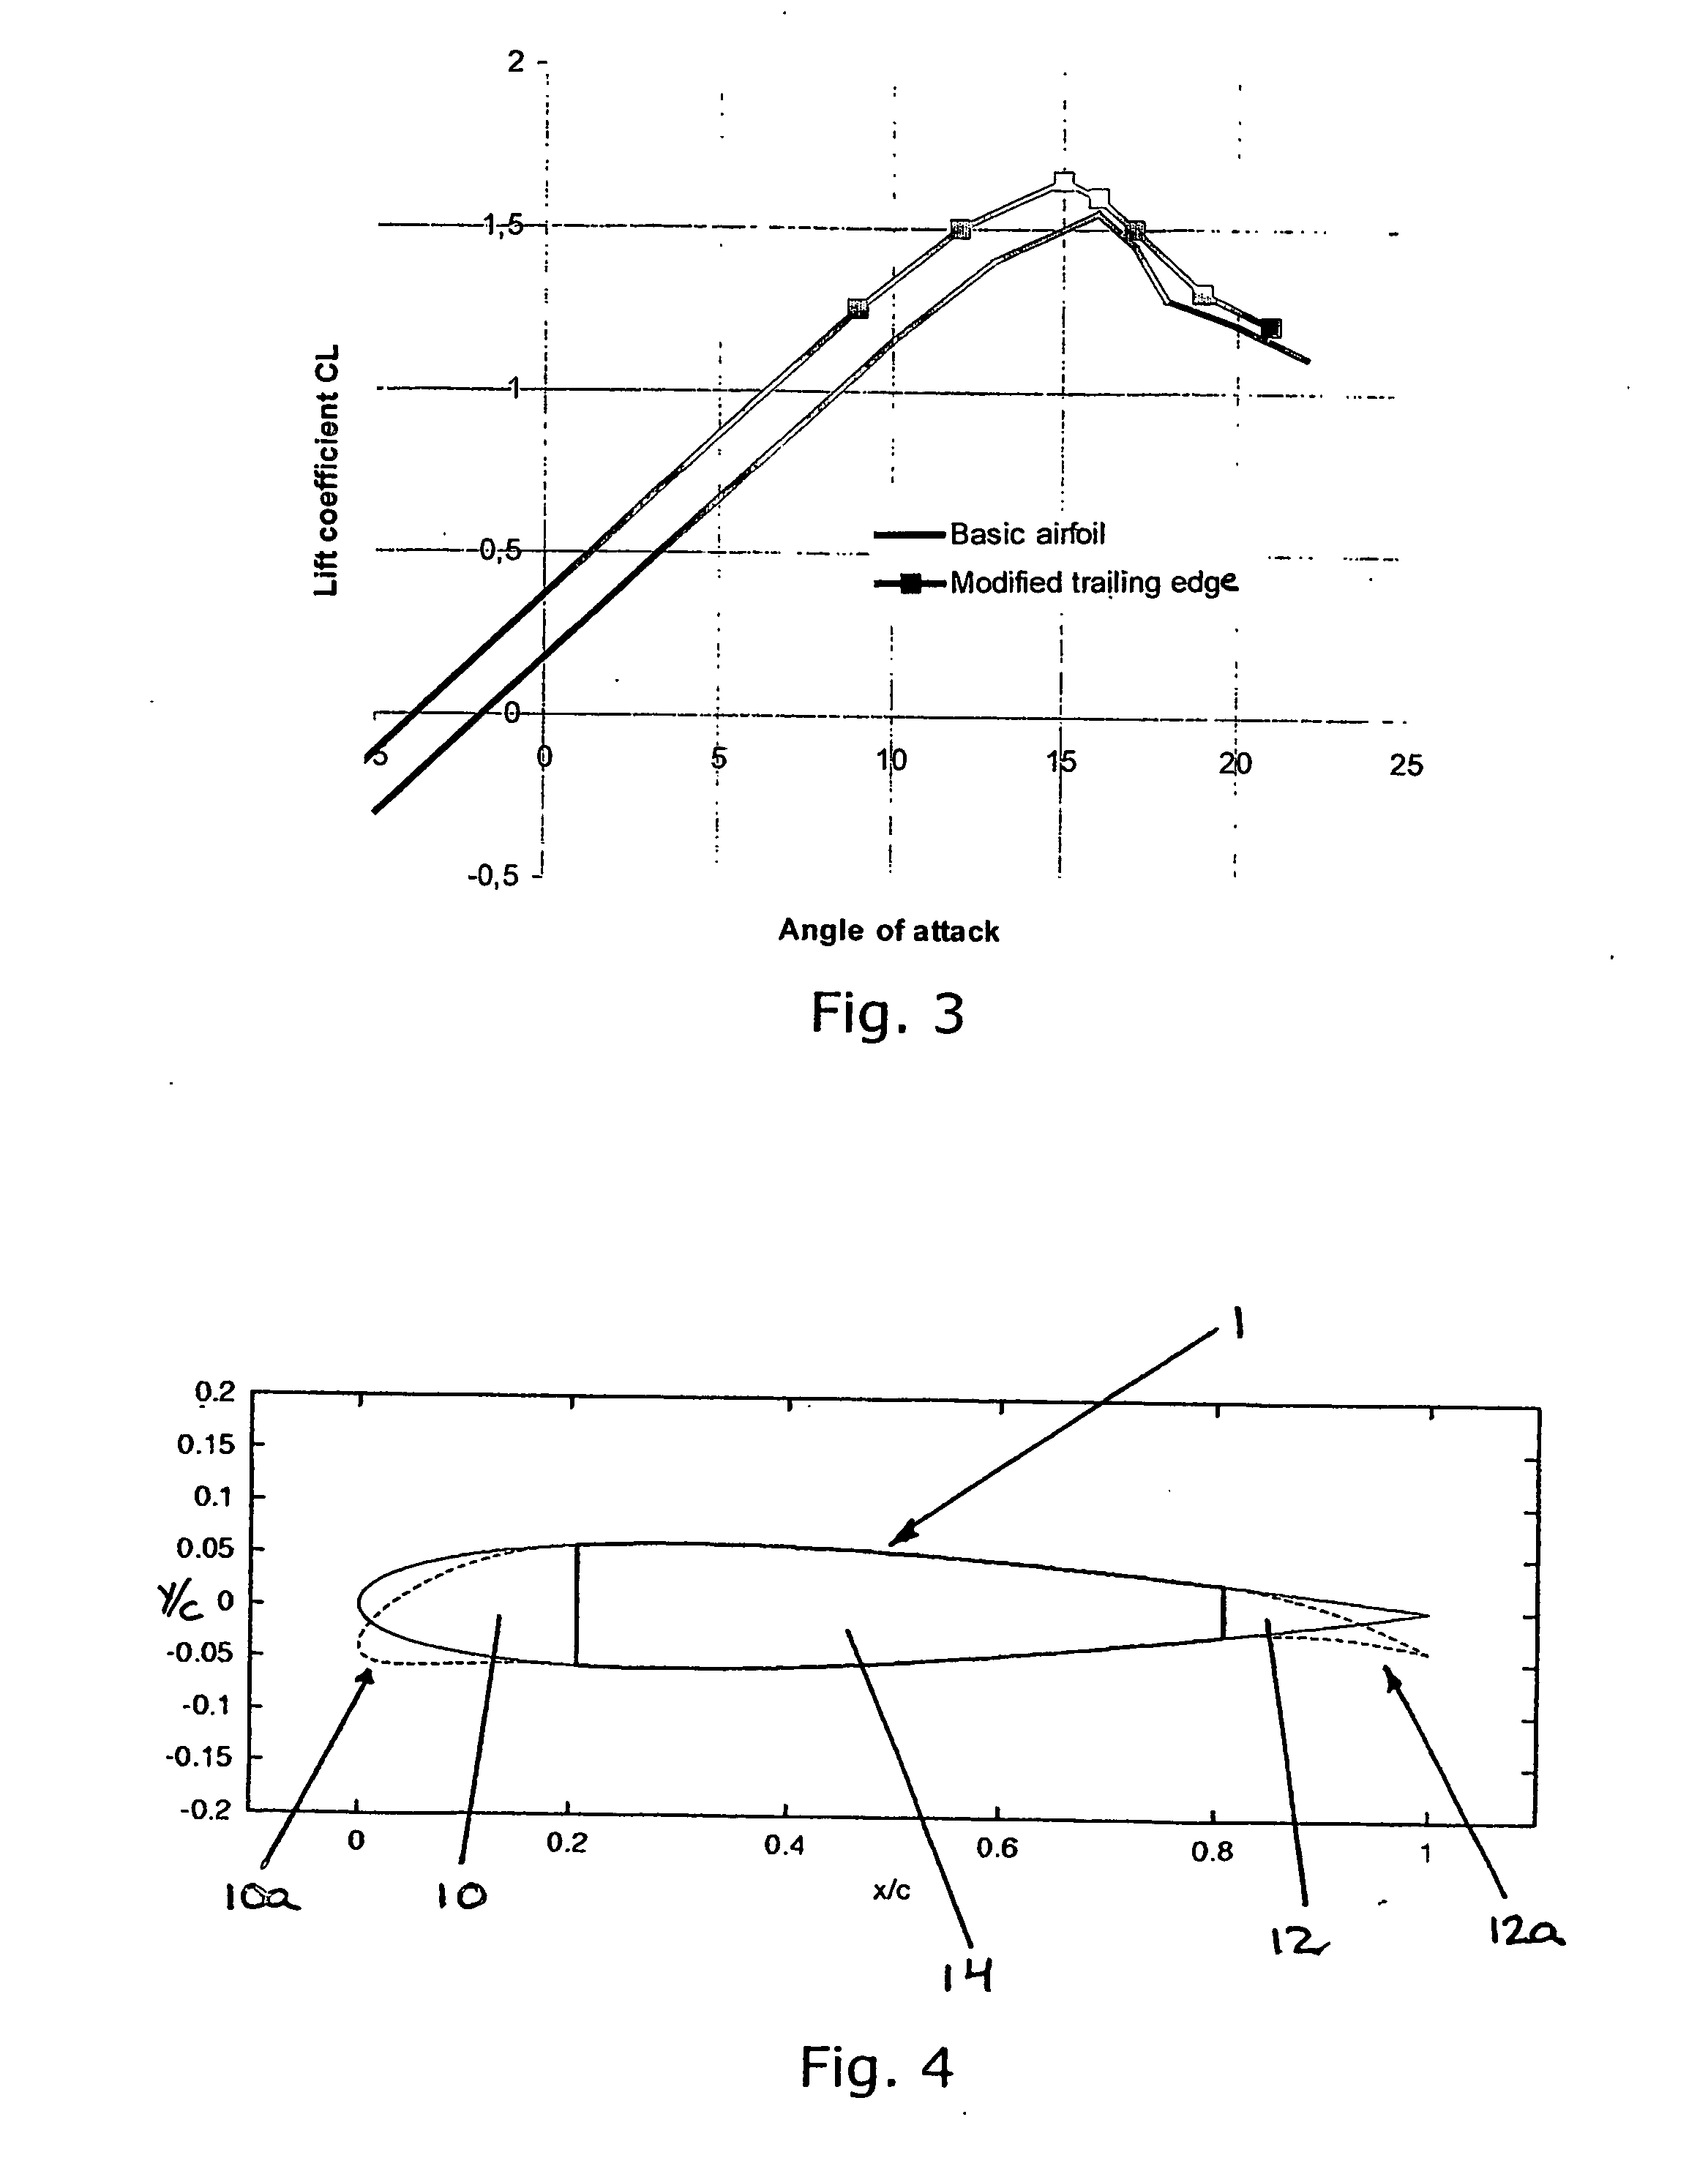 Control of power, loads and/or stability of a horizontal axis wind turbine by use of variable blade geometry control